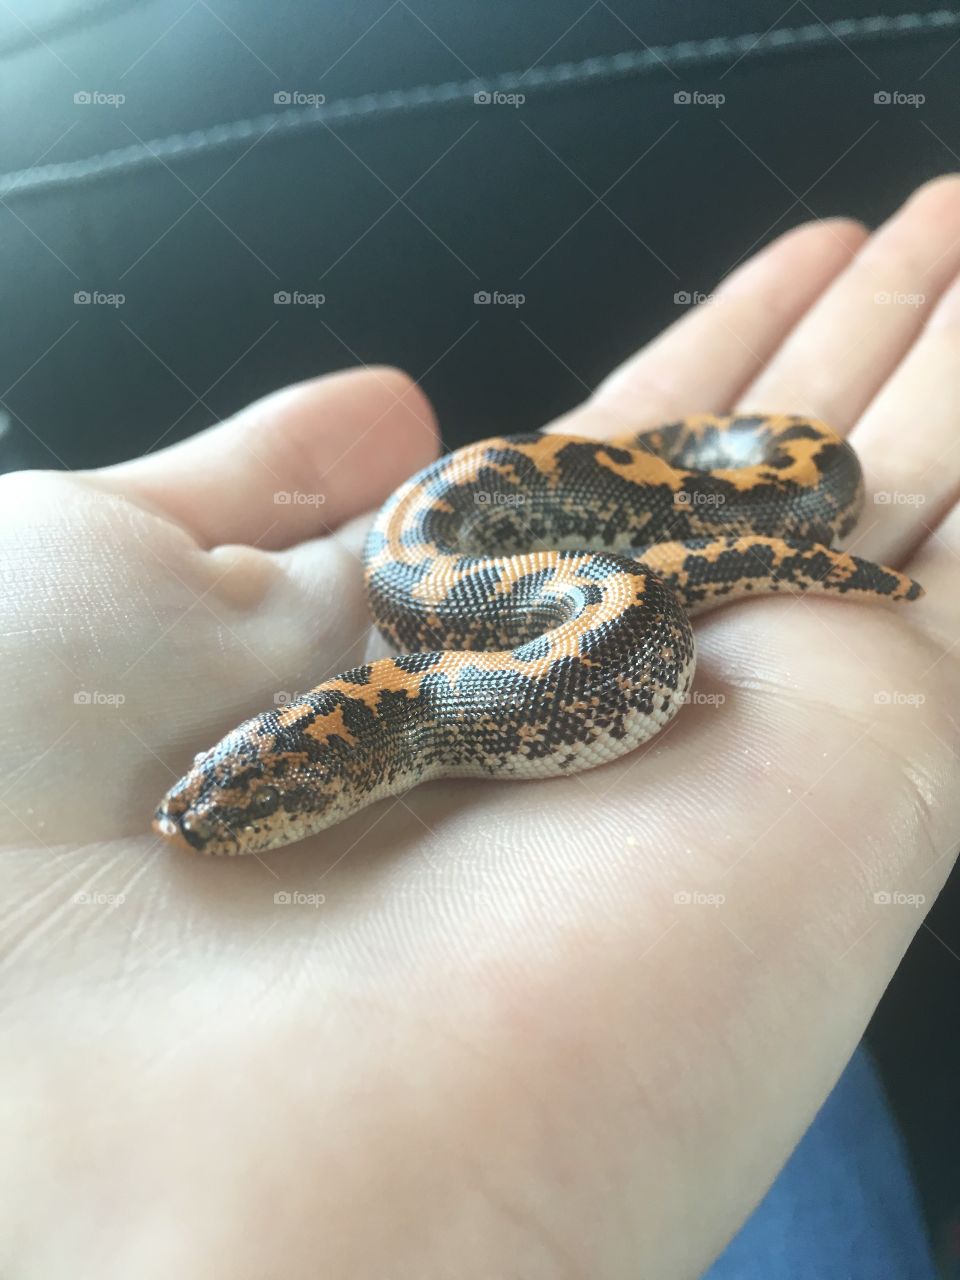 Baby Kenyan Sand Boa ready to go to his new home!